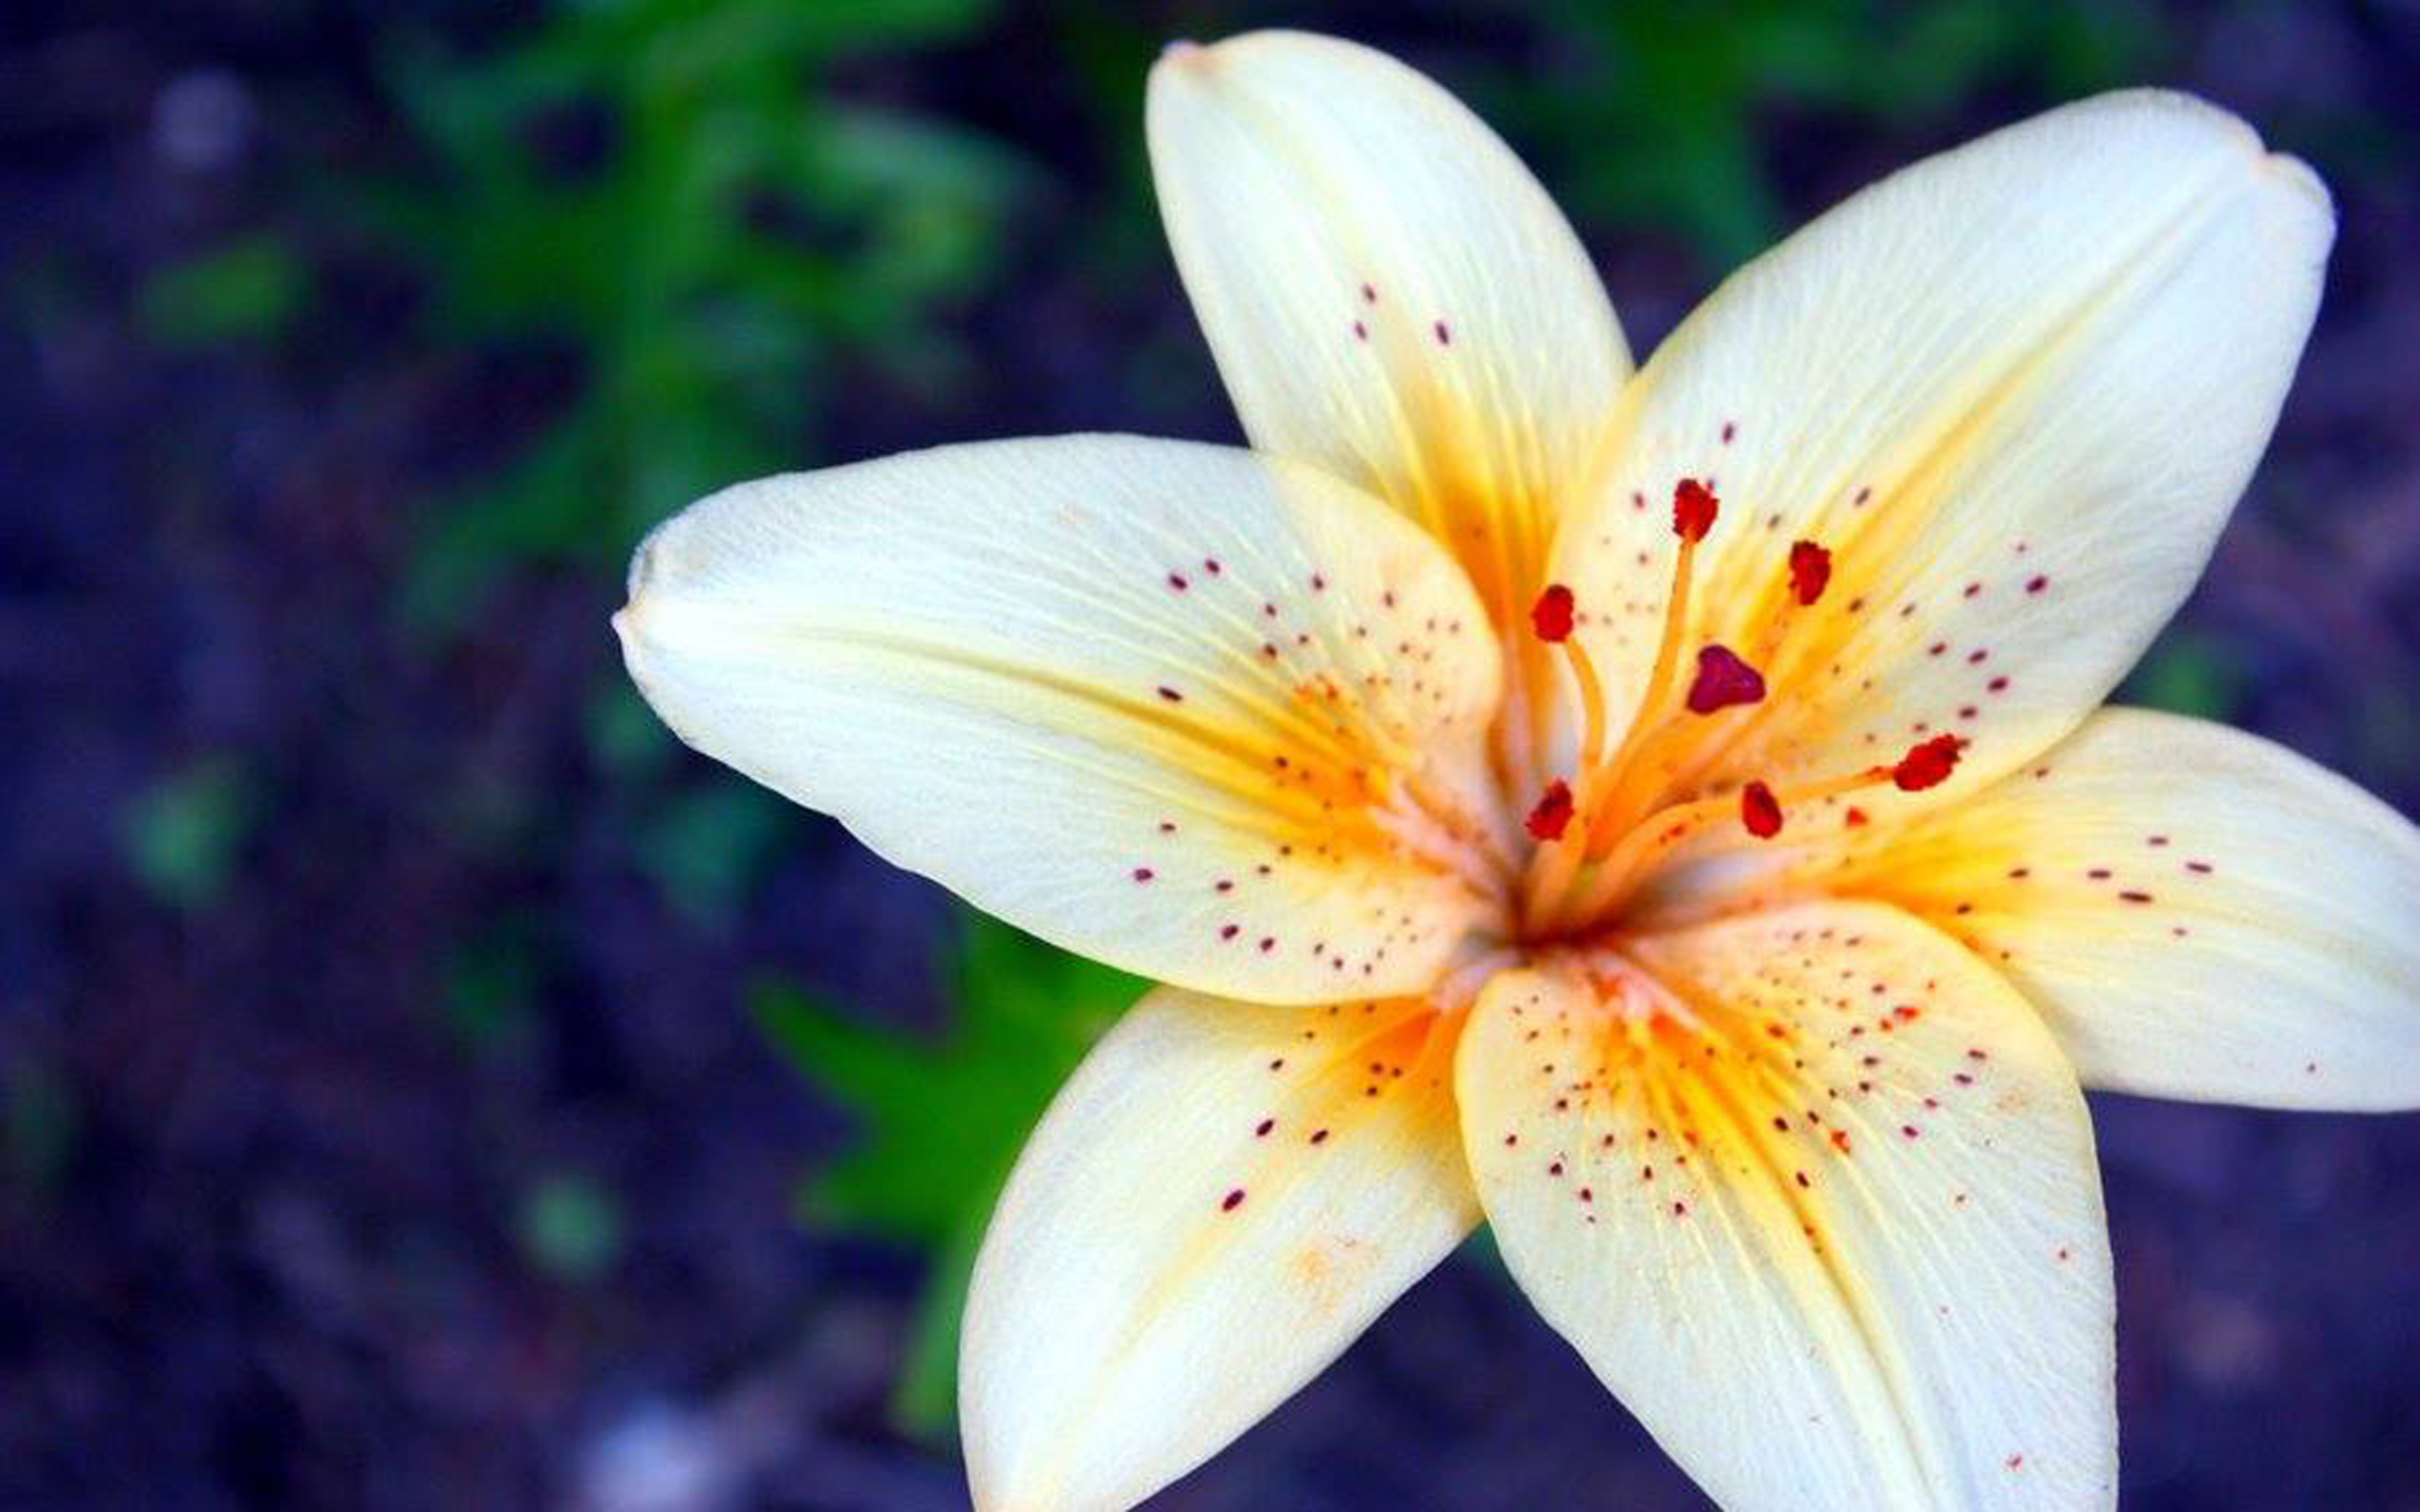 Lily Flower Wallpapers Hd 2560x1600 : Wallpapers13.com